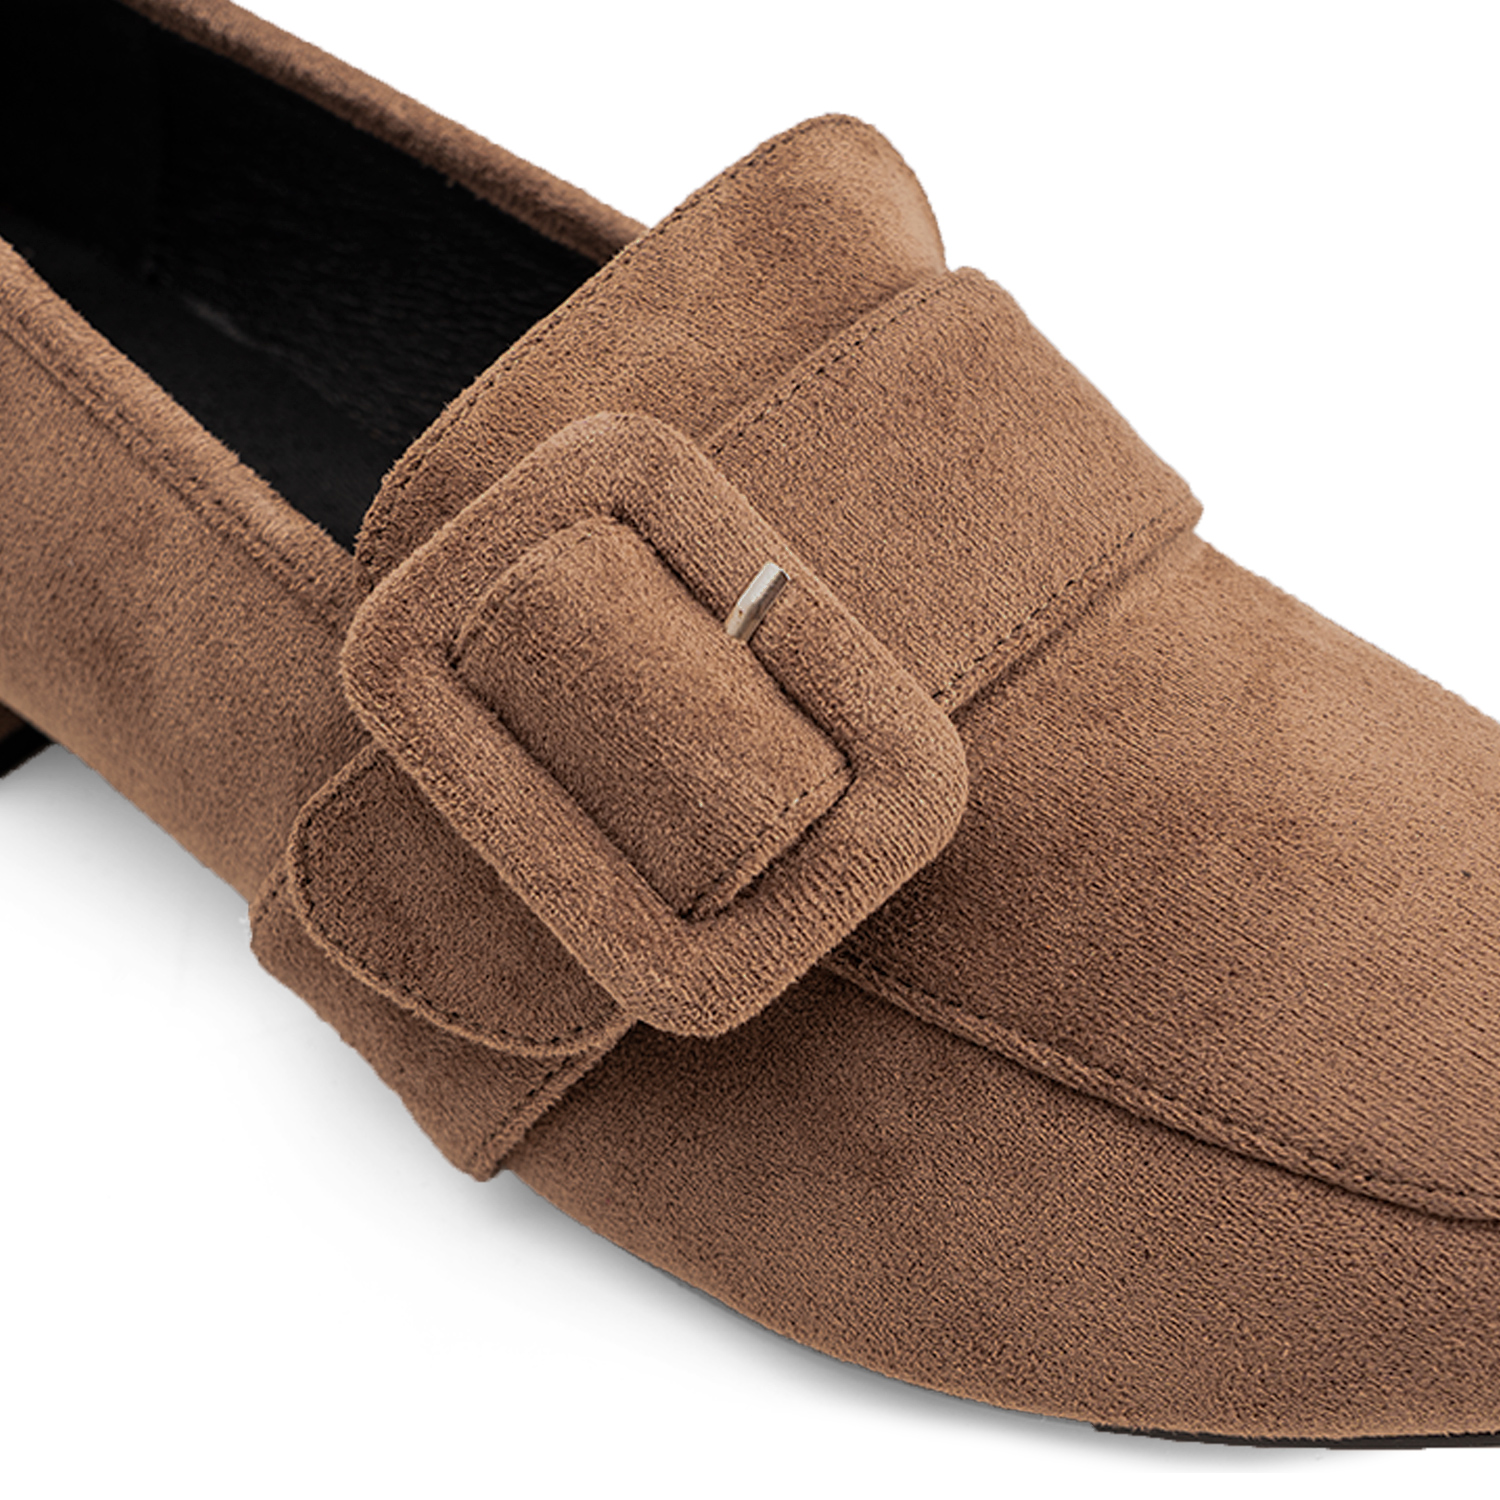 Loafer in Taupe 